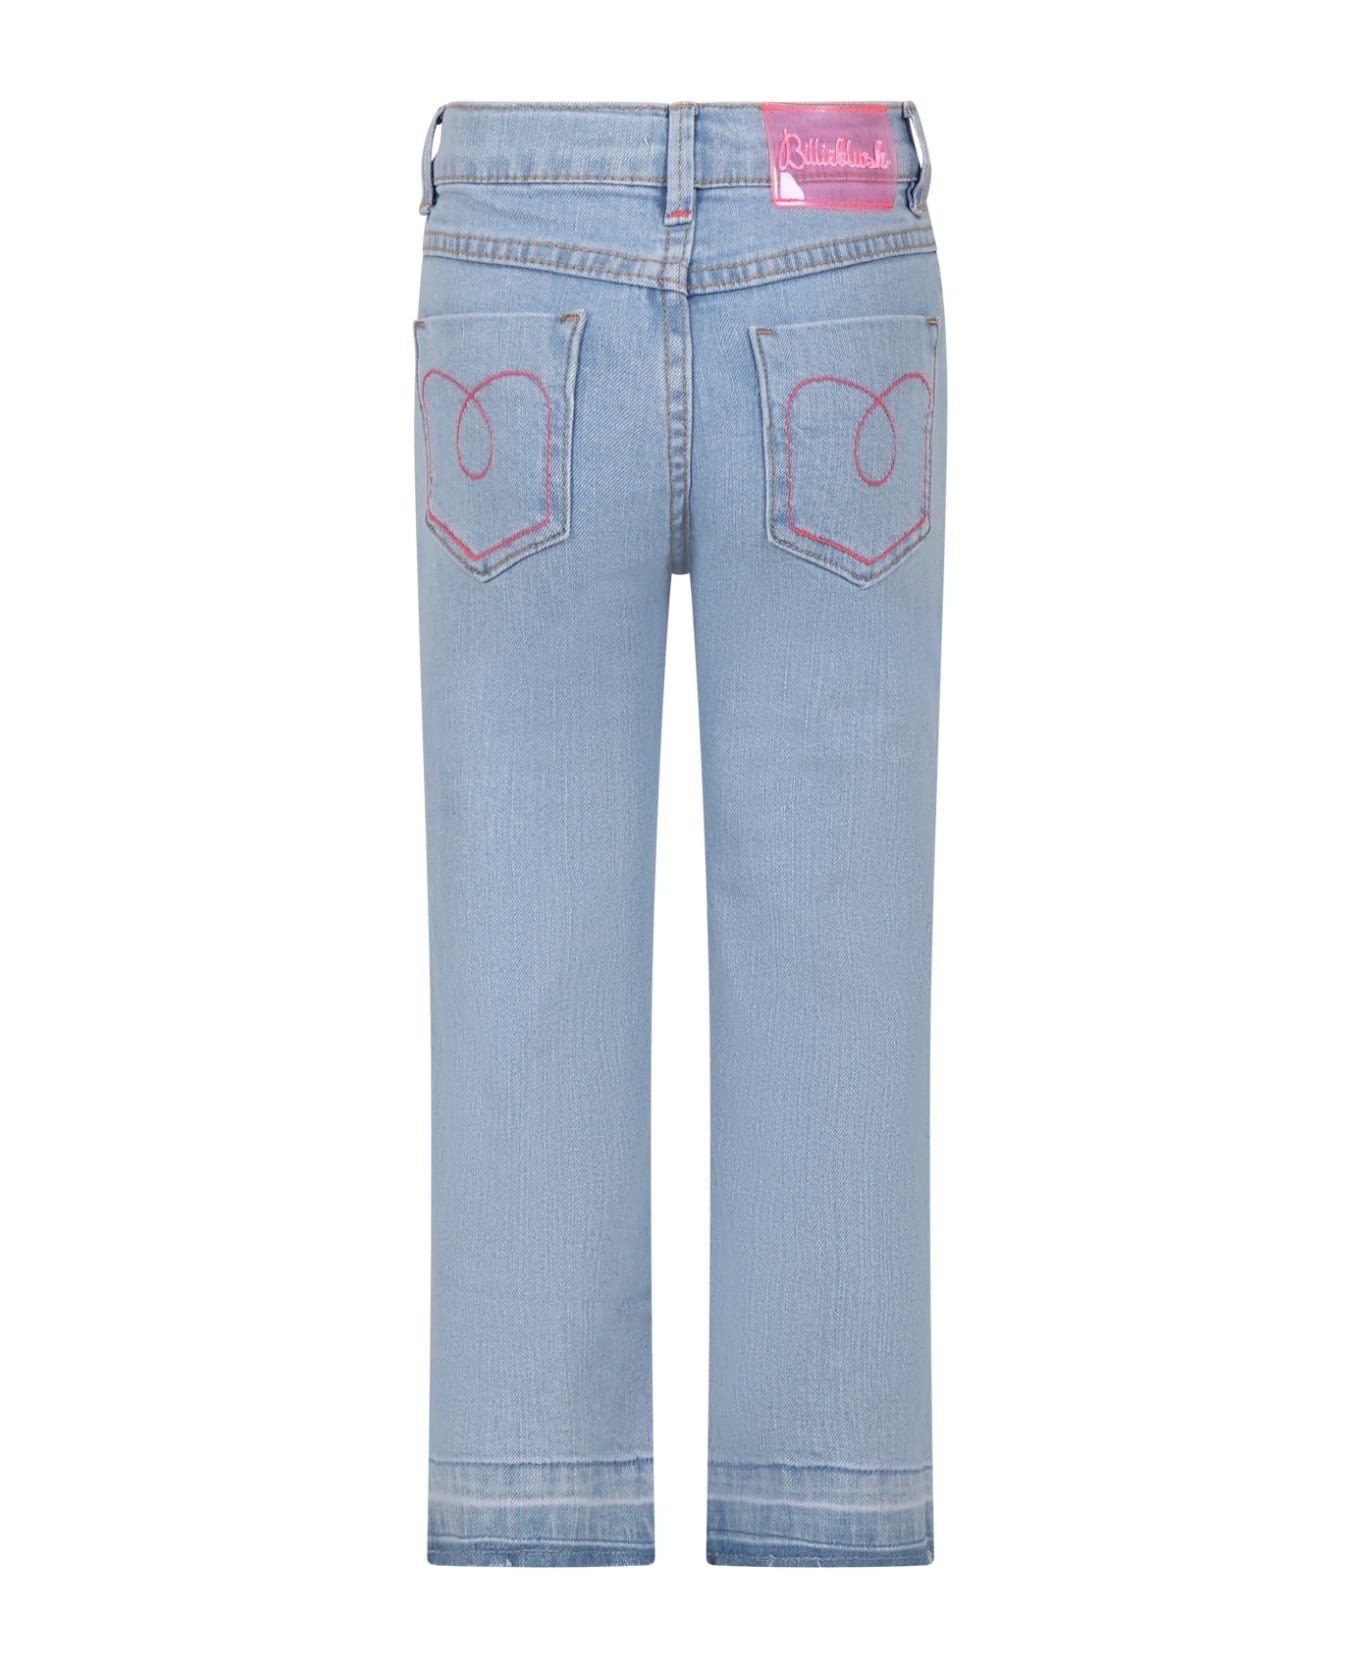 Billieblush Denim Jeans For Girl With Sequin Patches - Denim